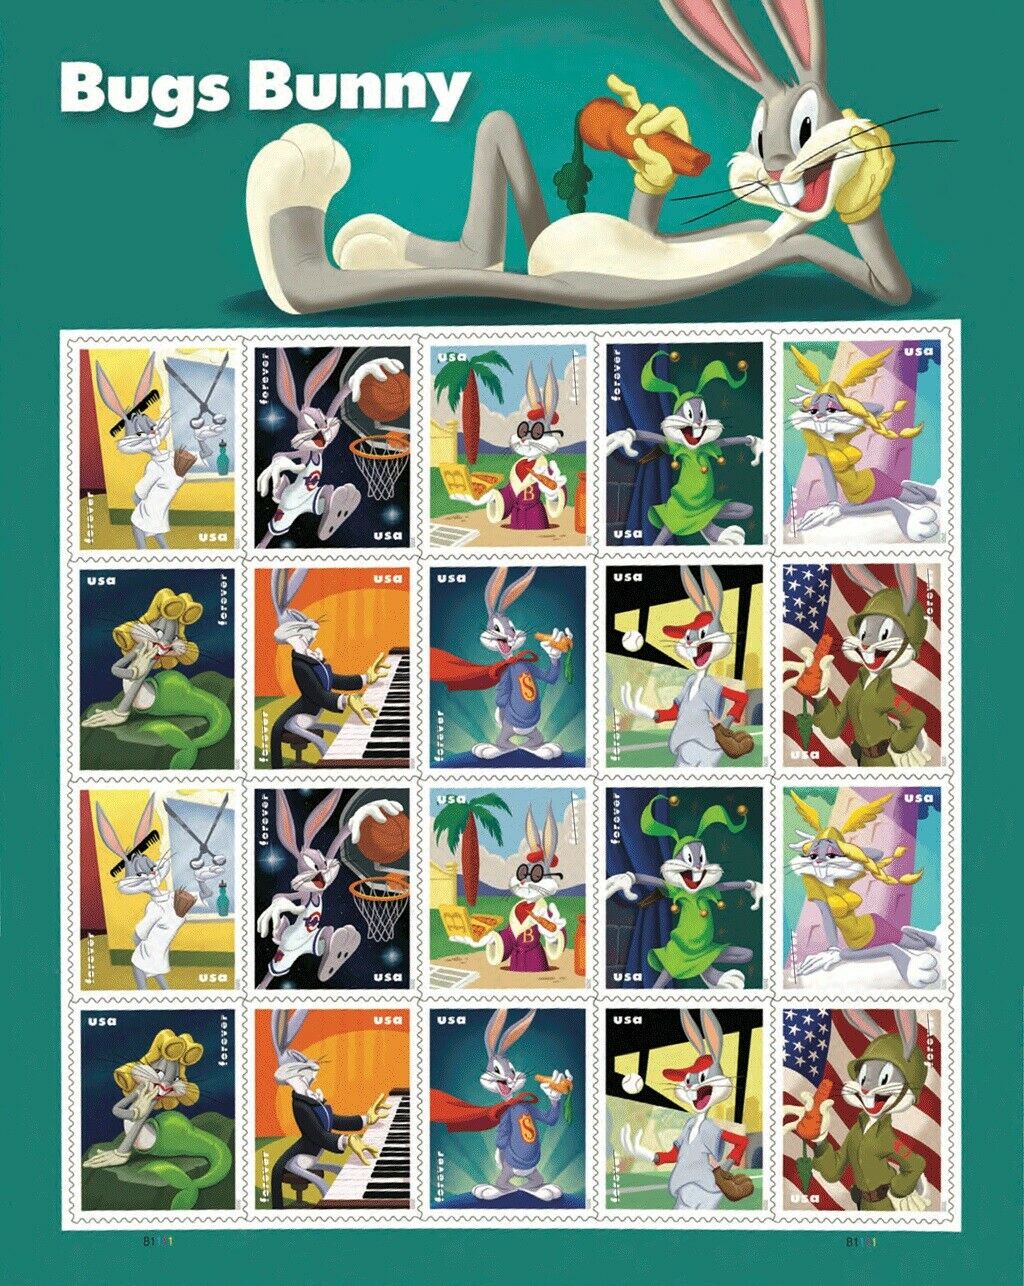 Bugs Bunny stamps